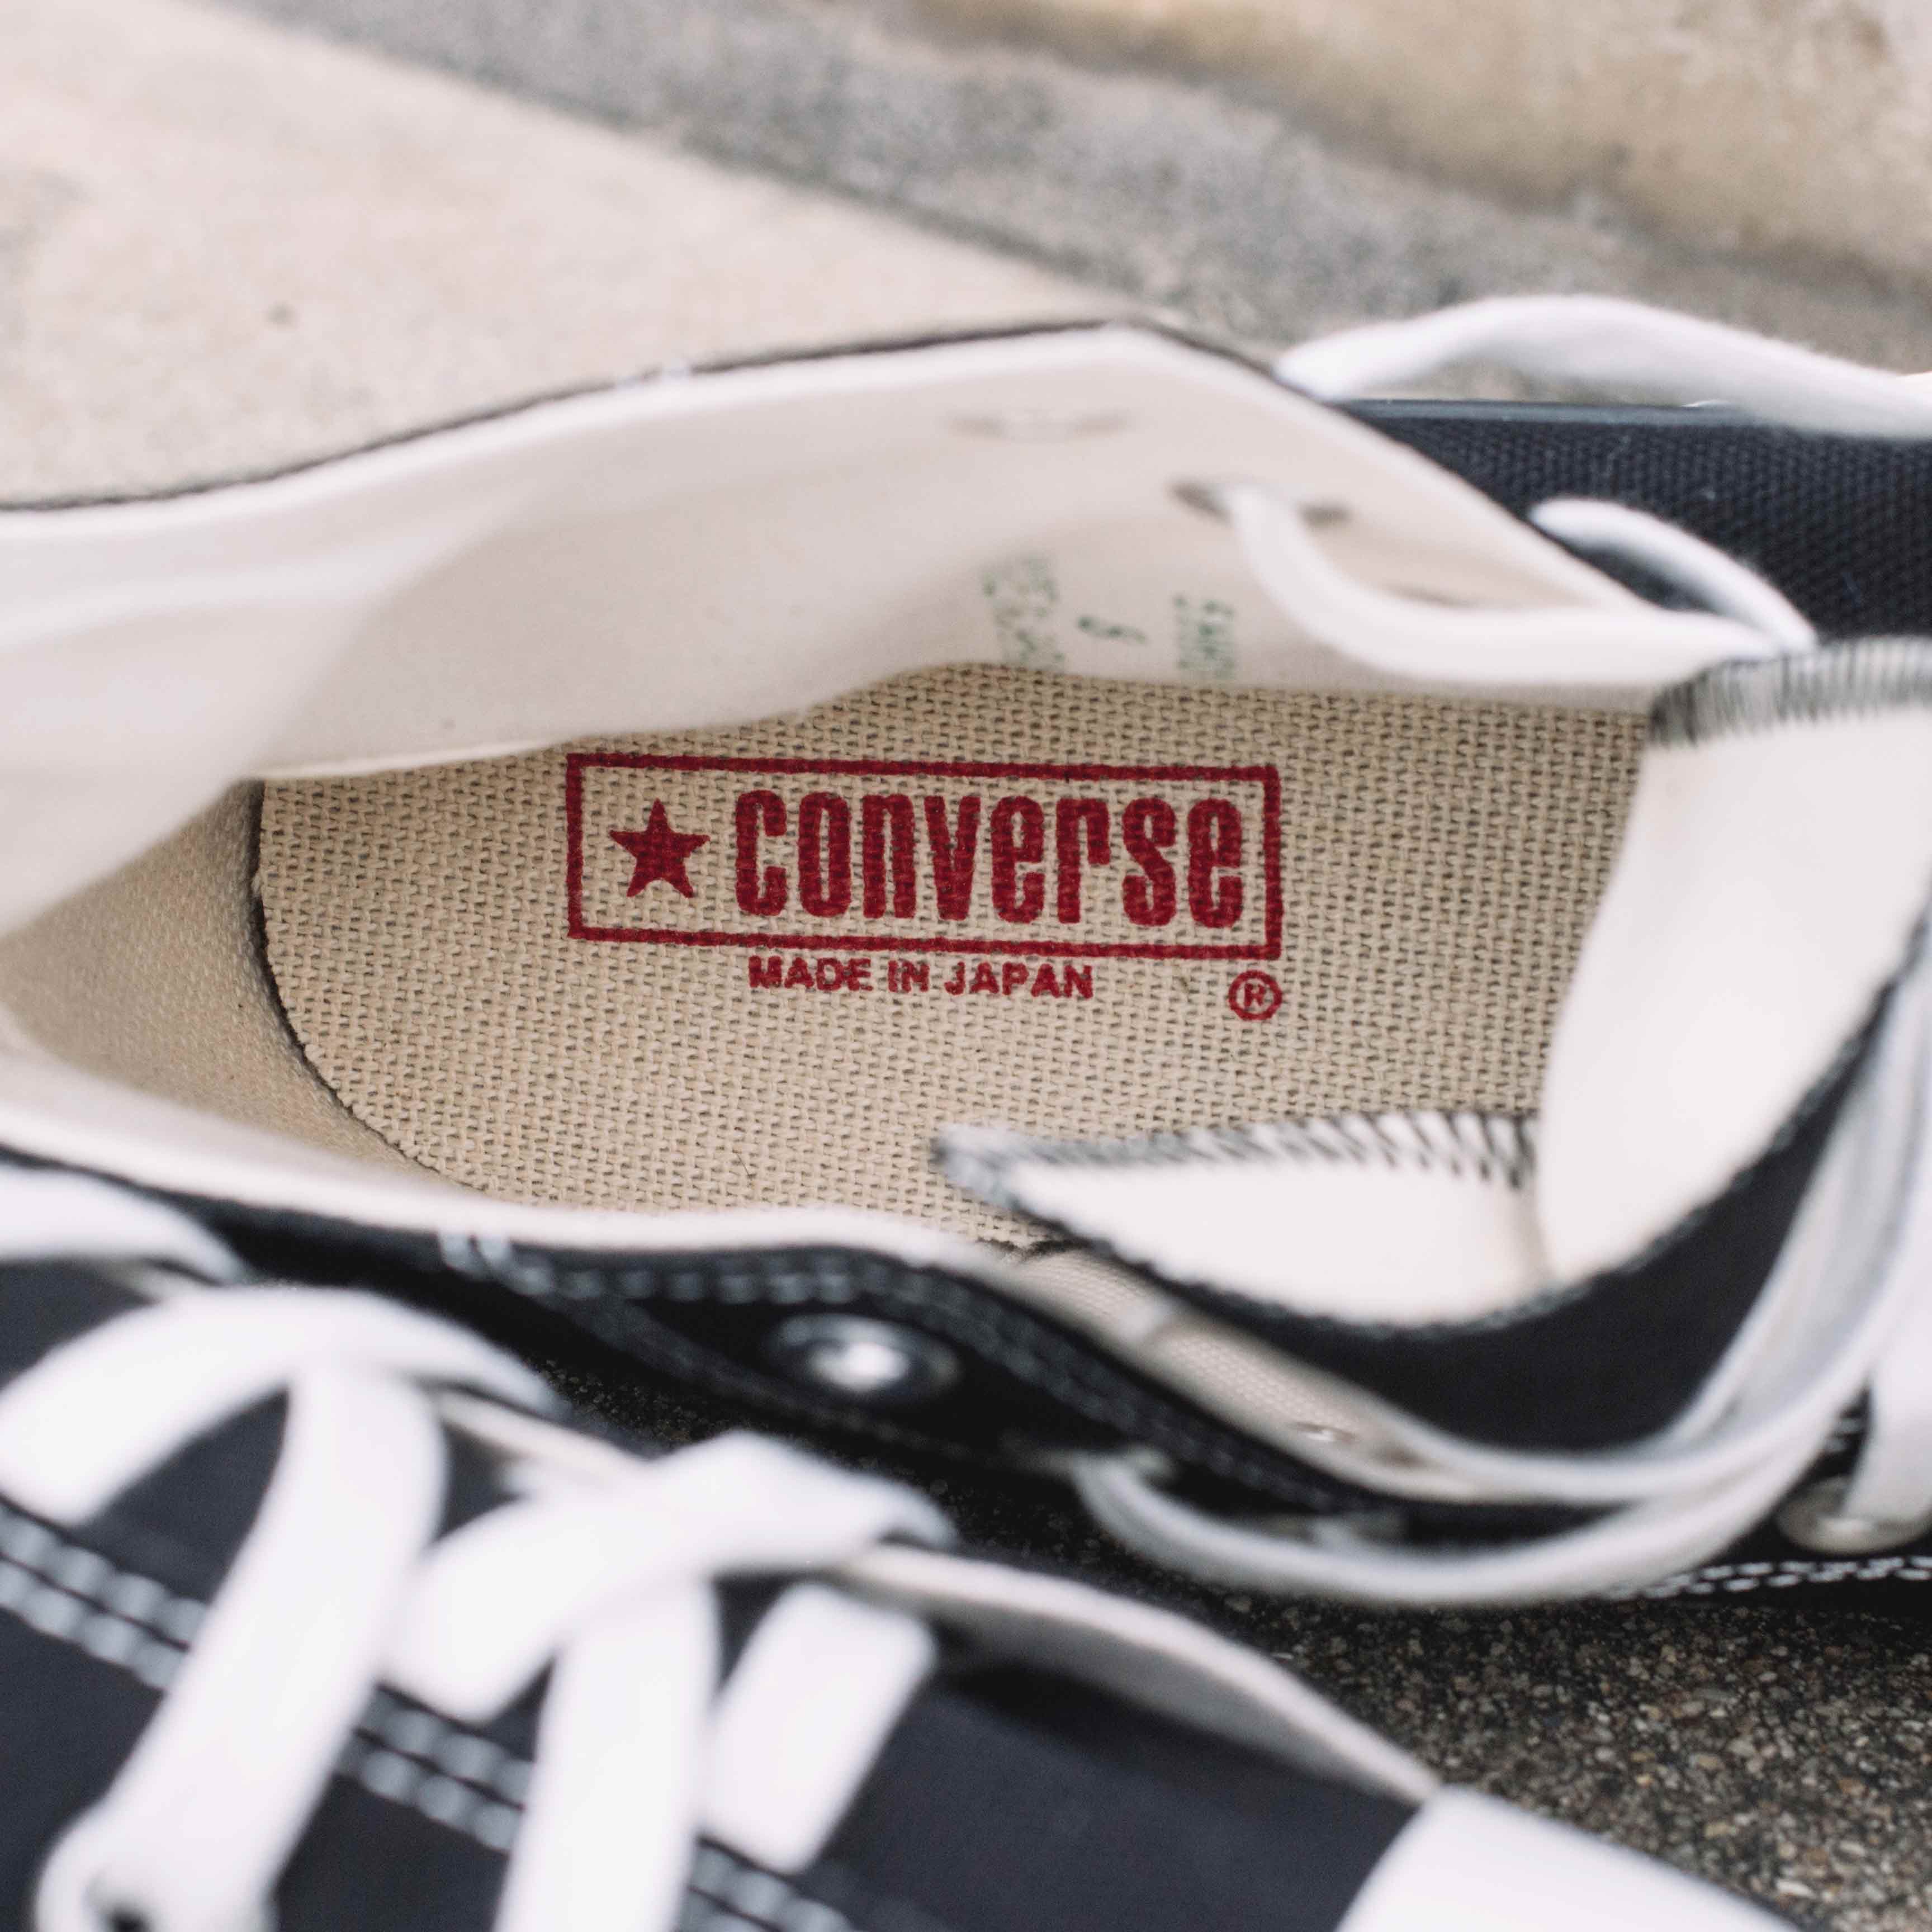 converse made in japan review